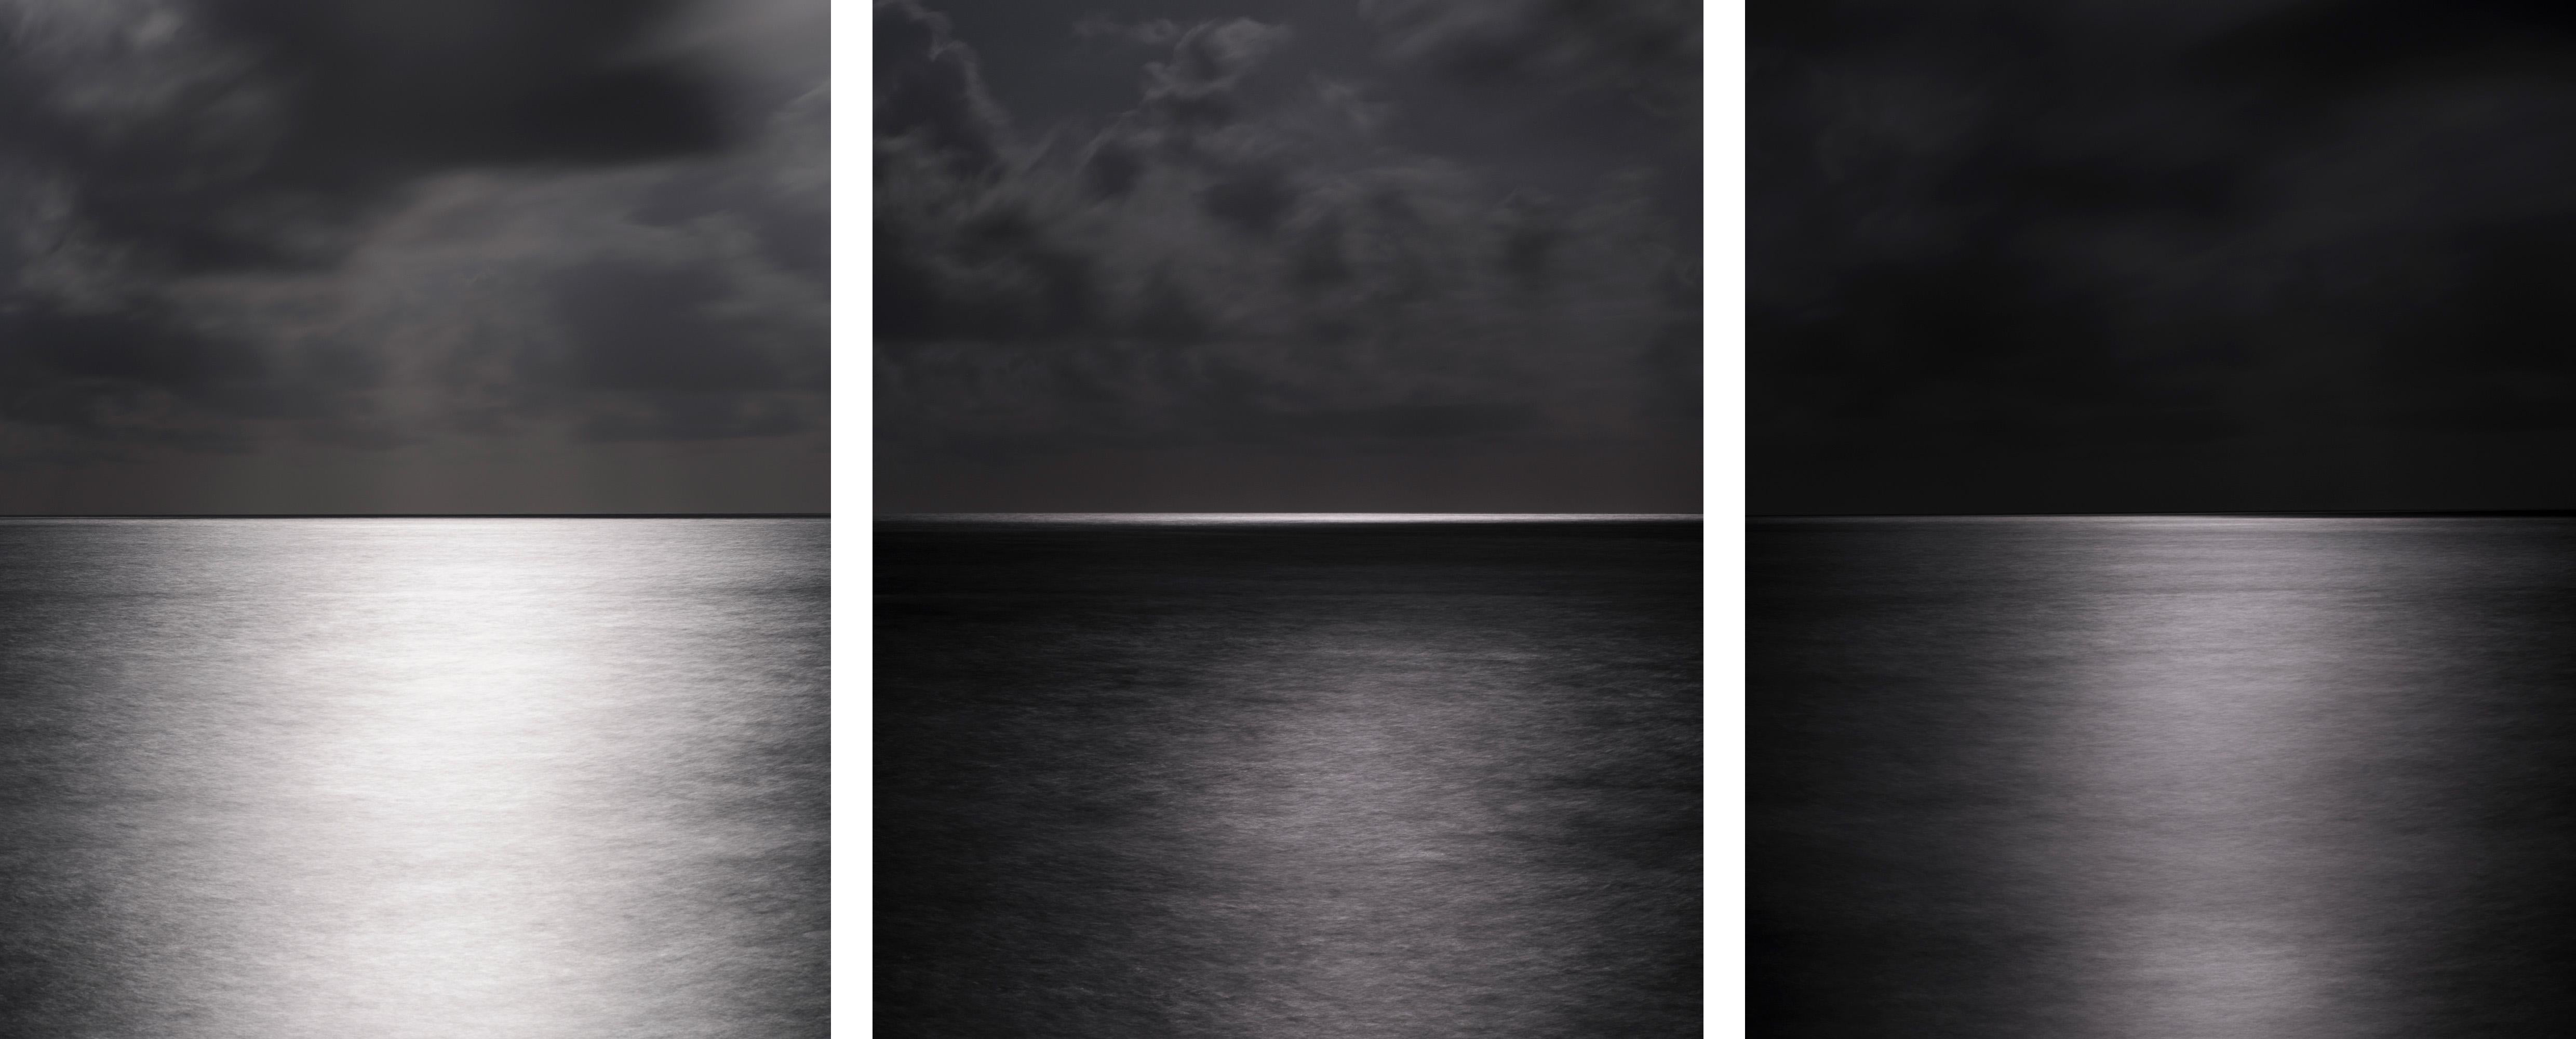 Miguel Winograd  Landscape Photograph - Moonrise III, II and I. Triptych From the Series Mares. 